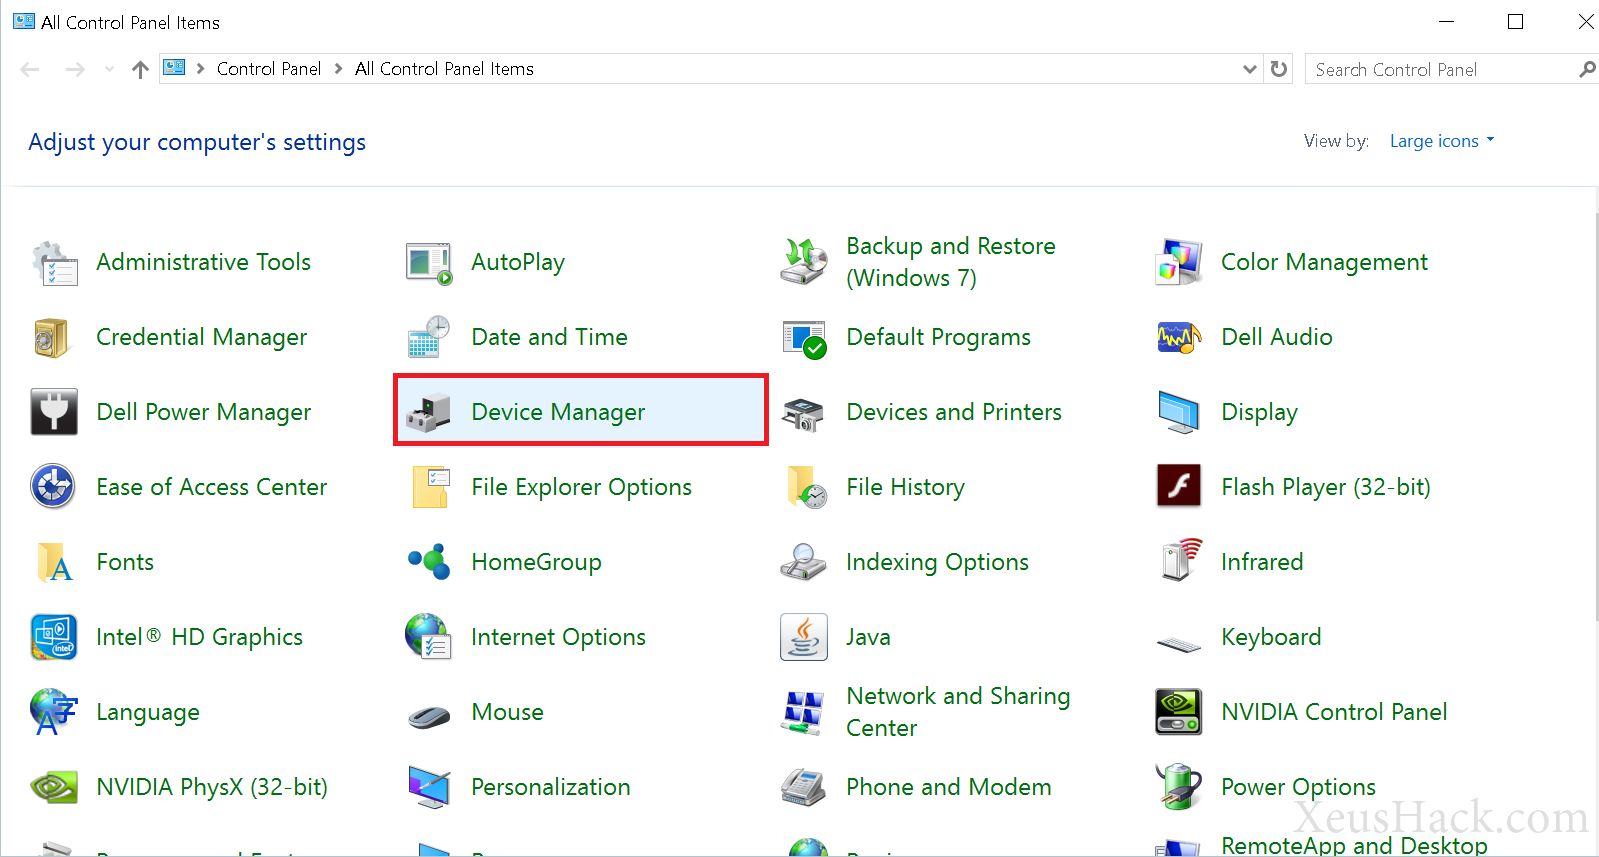 Open device manager from the control panel